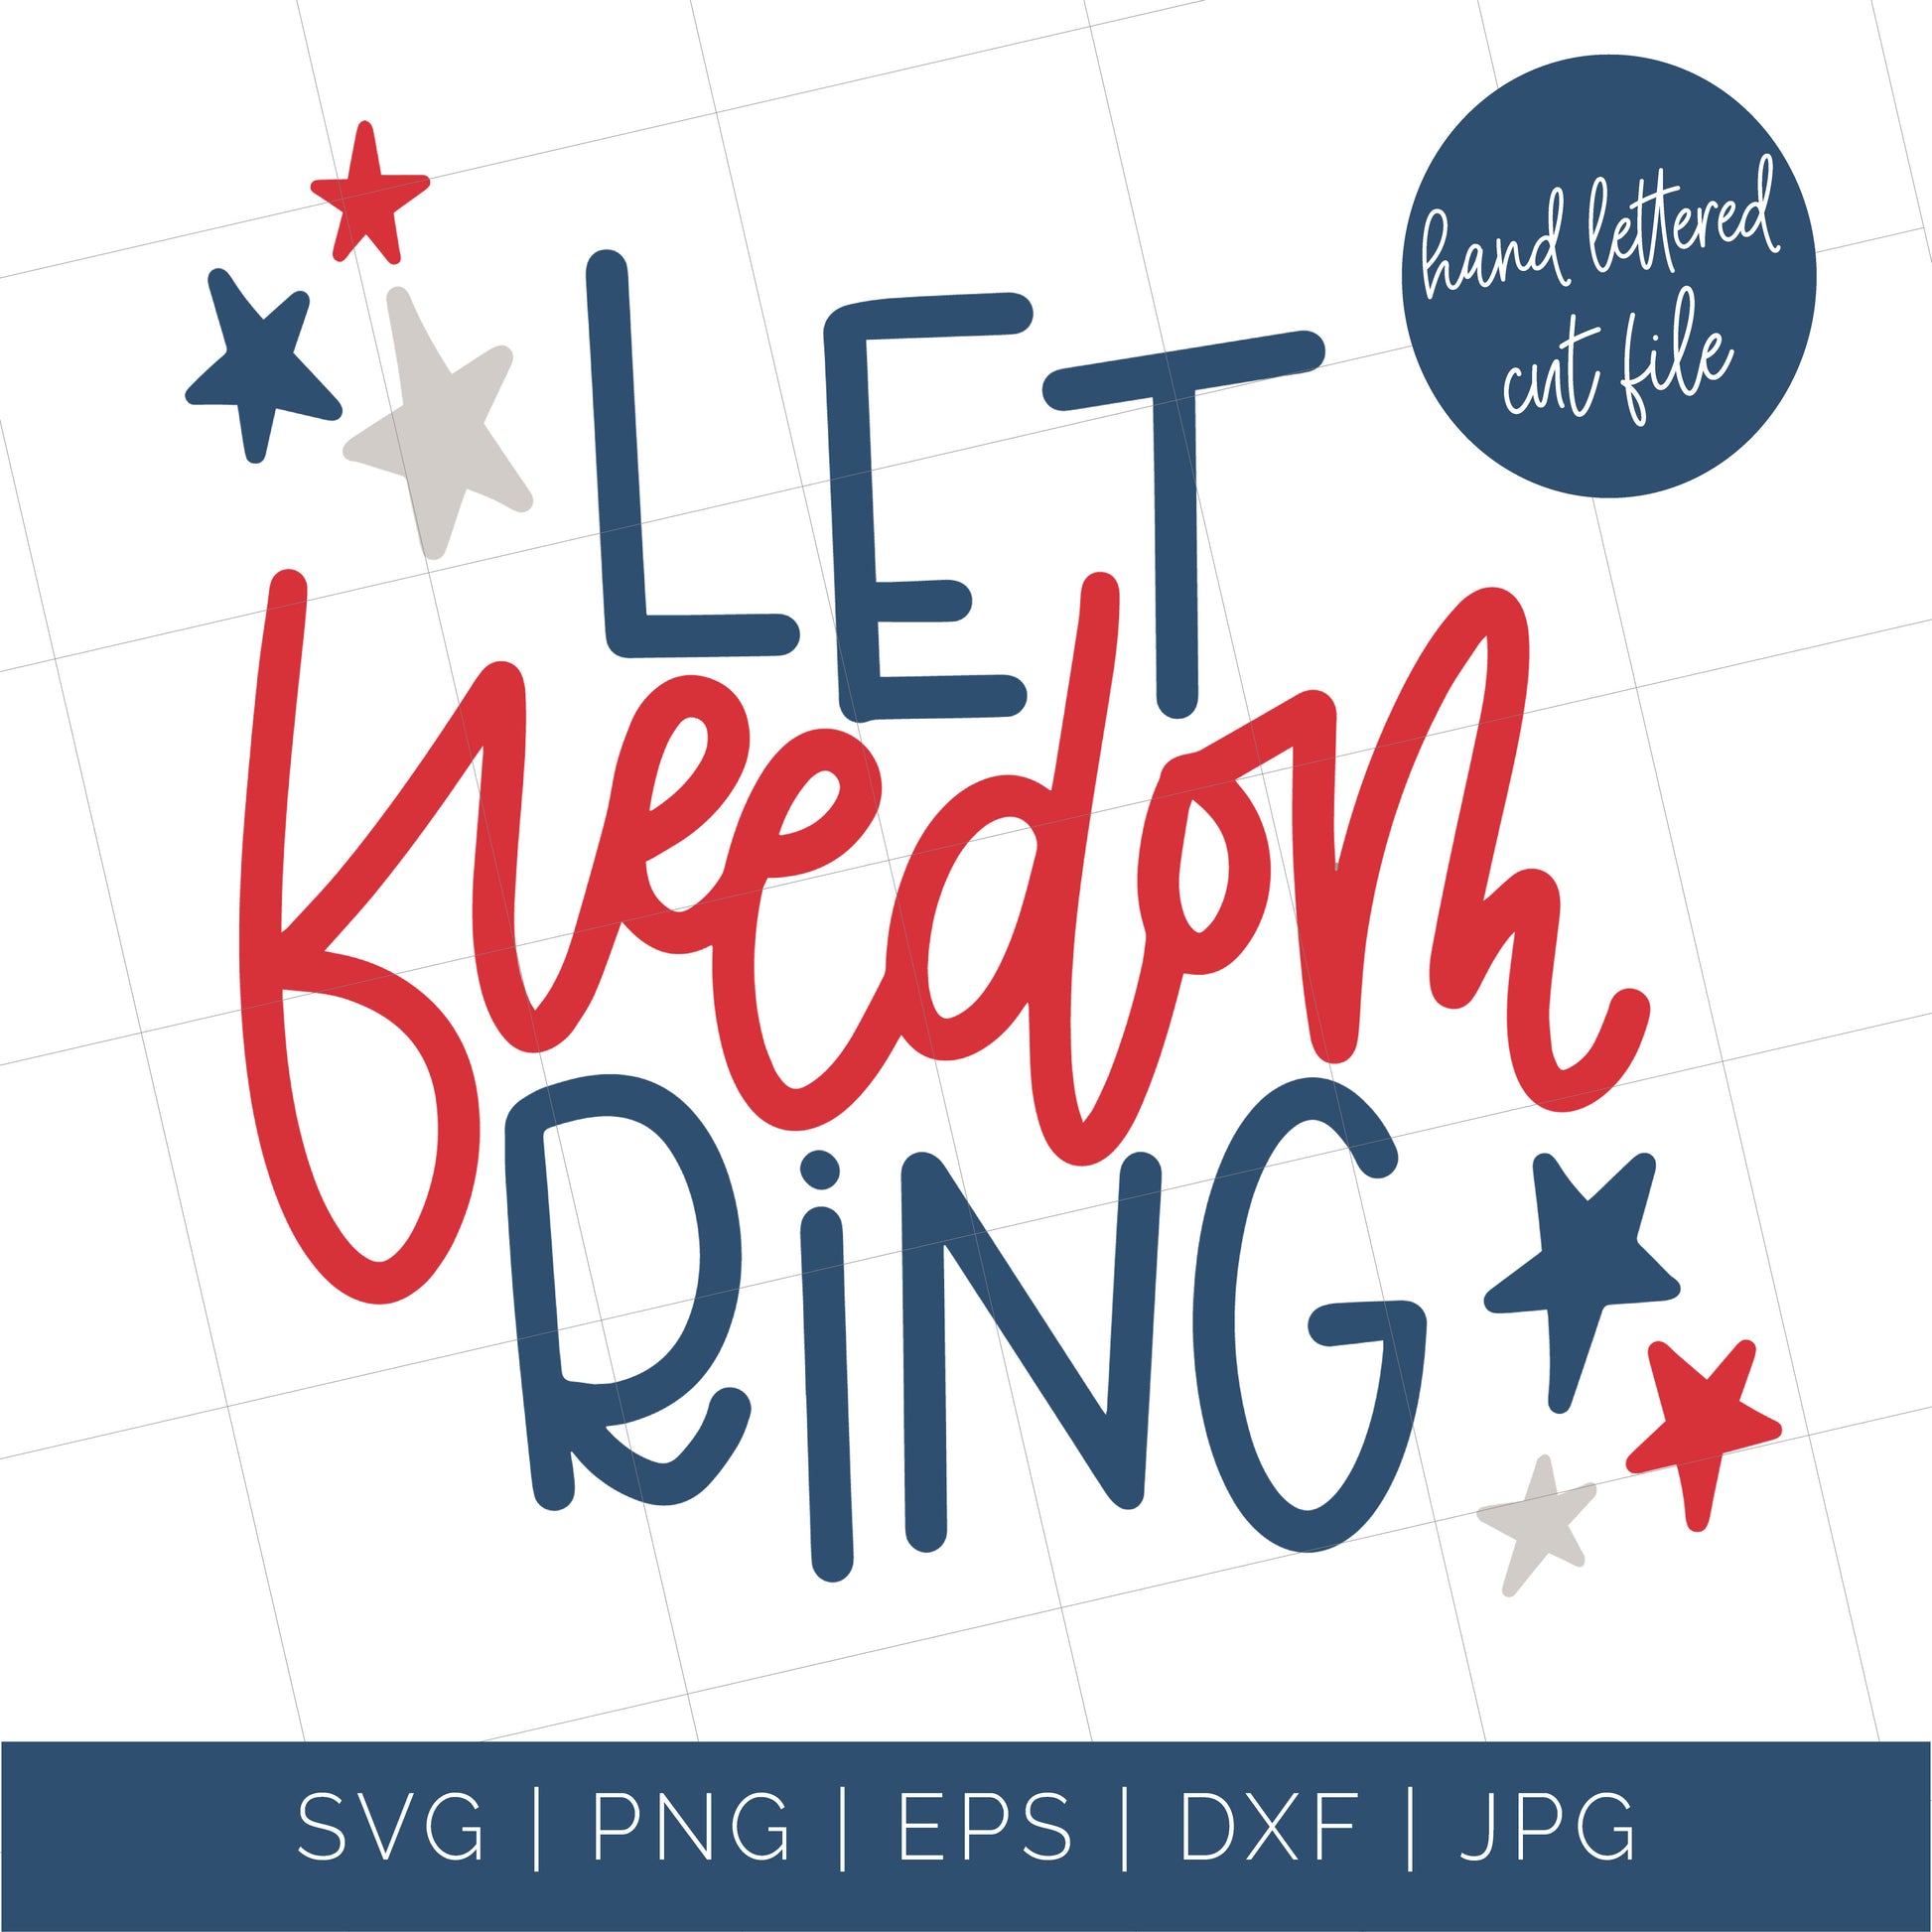 4th of July Cut File - Let Freedom Ring - flowerchildmockups